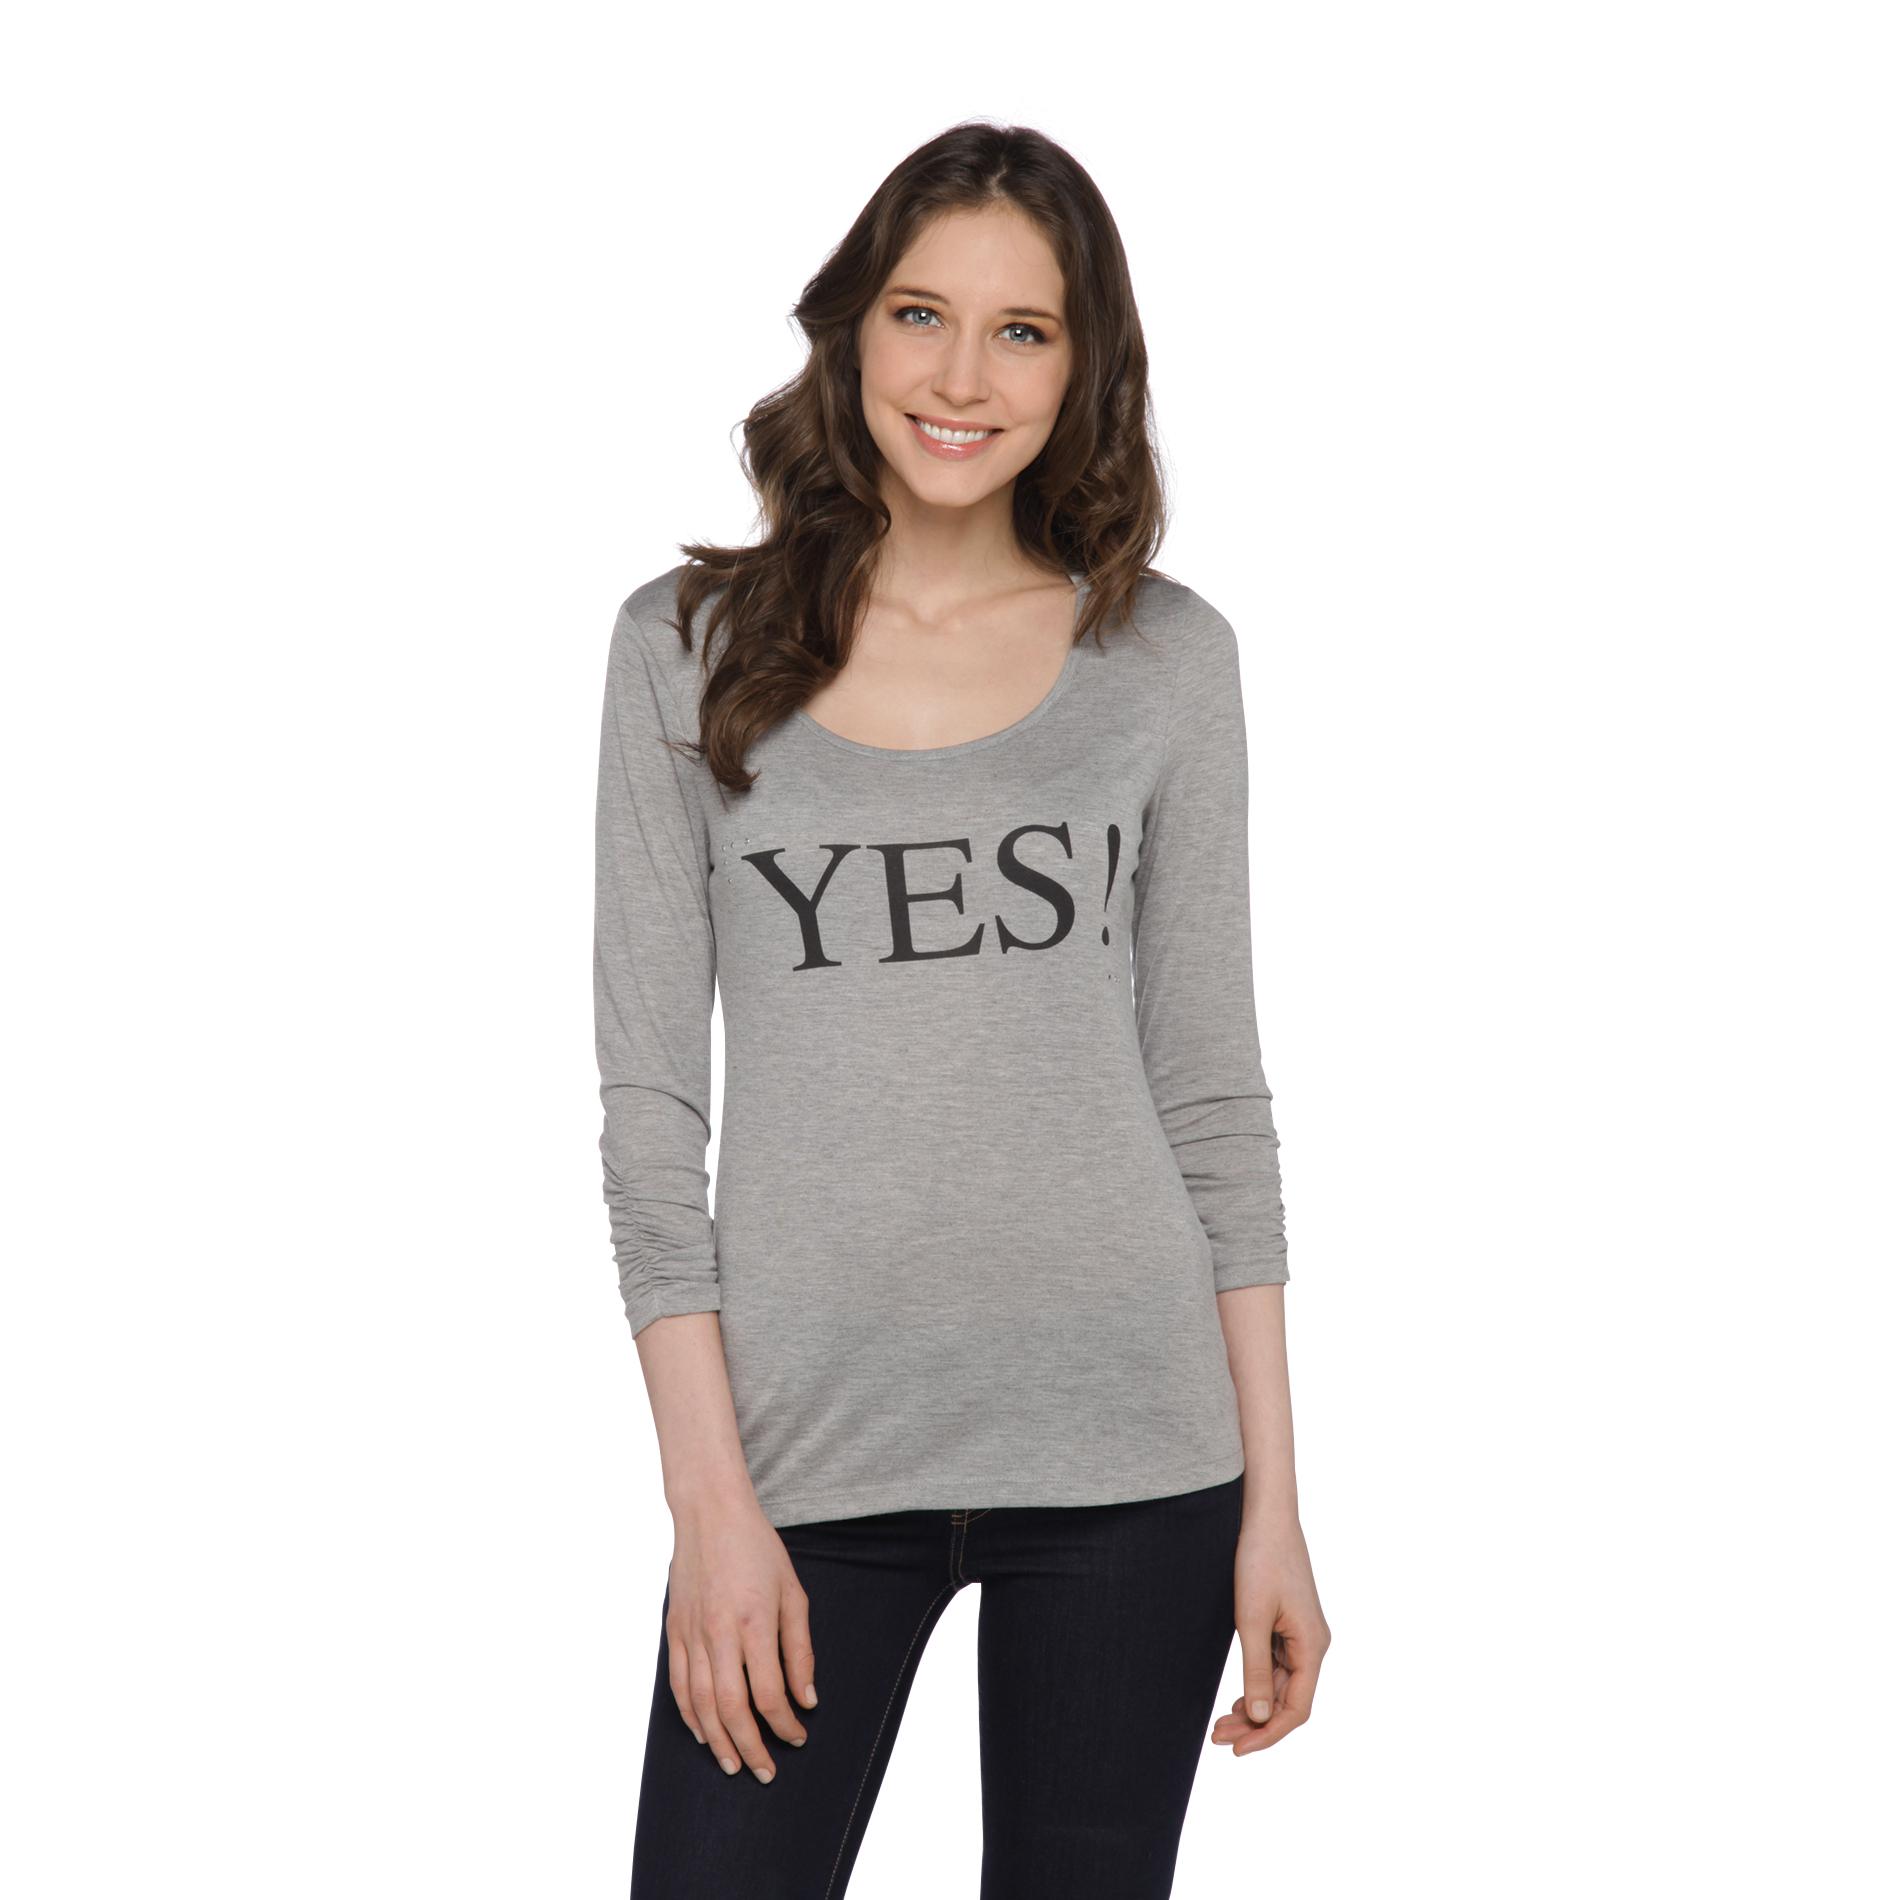 Women's Graphic Knit Top - Yes!